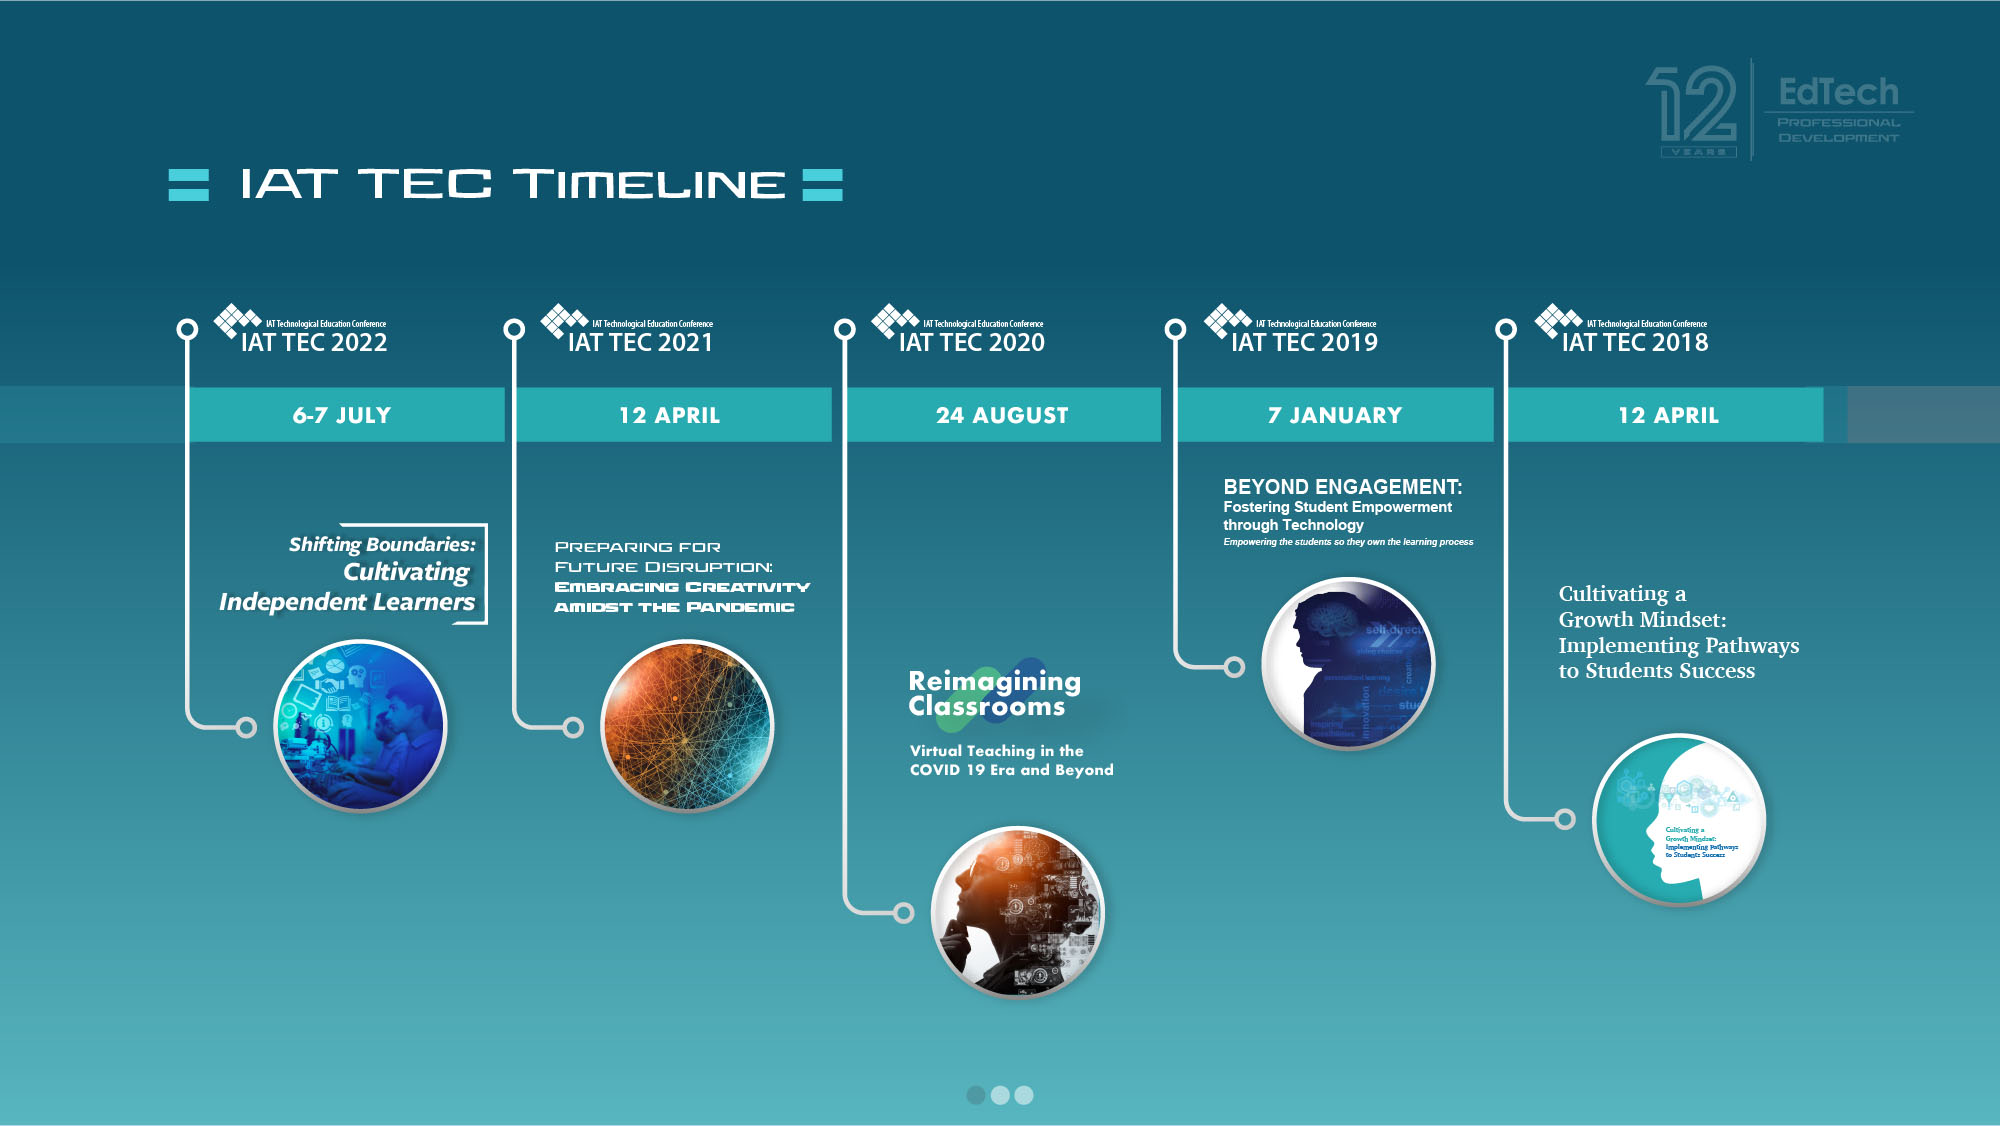 Time line 1 